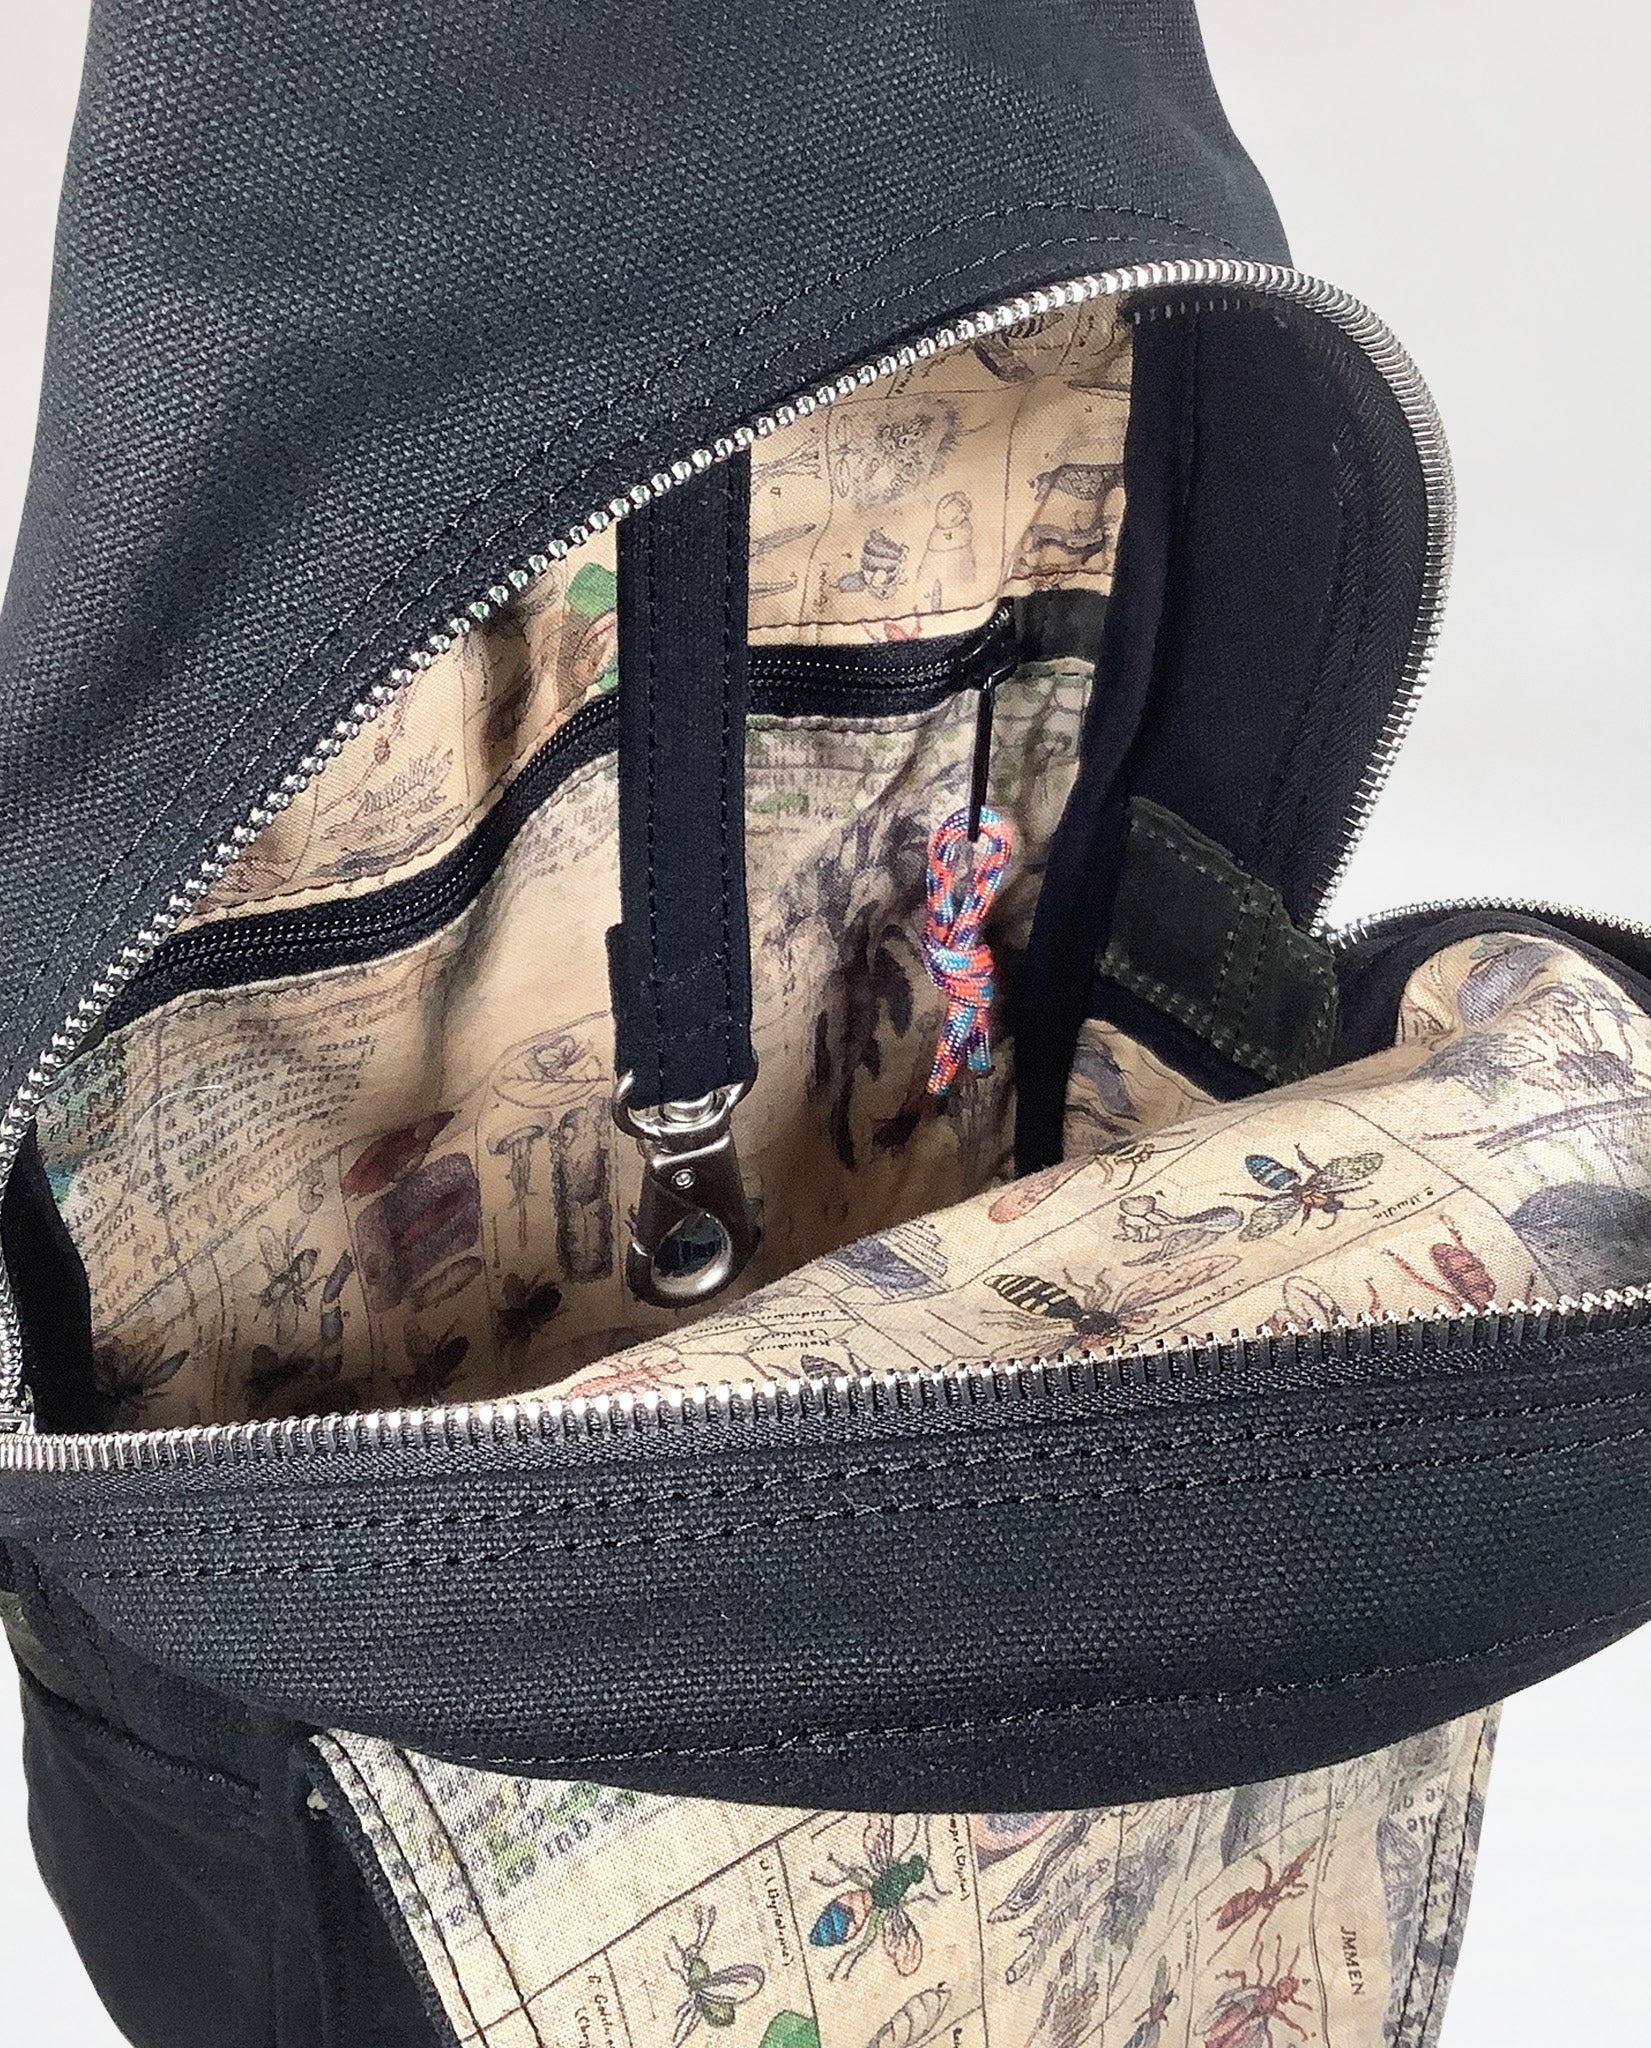 Interior of Dock 5’s Kingfisher Canvas Sling Bag in black featuring a leash for keys and a zipper pocket